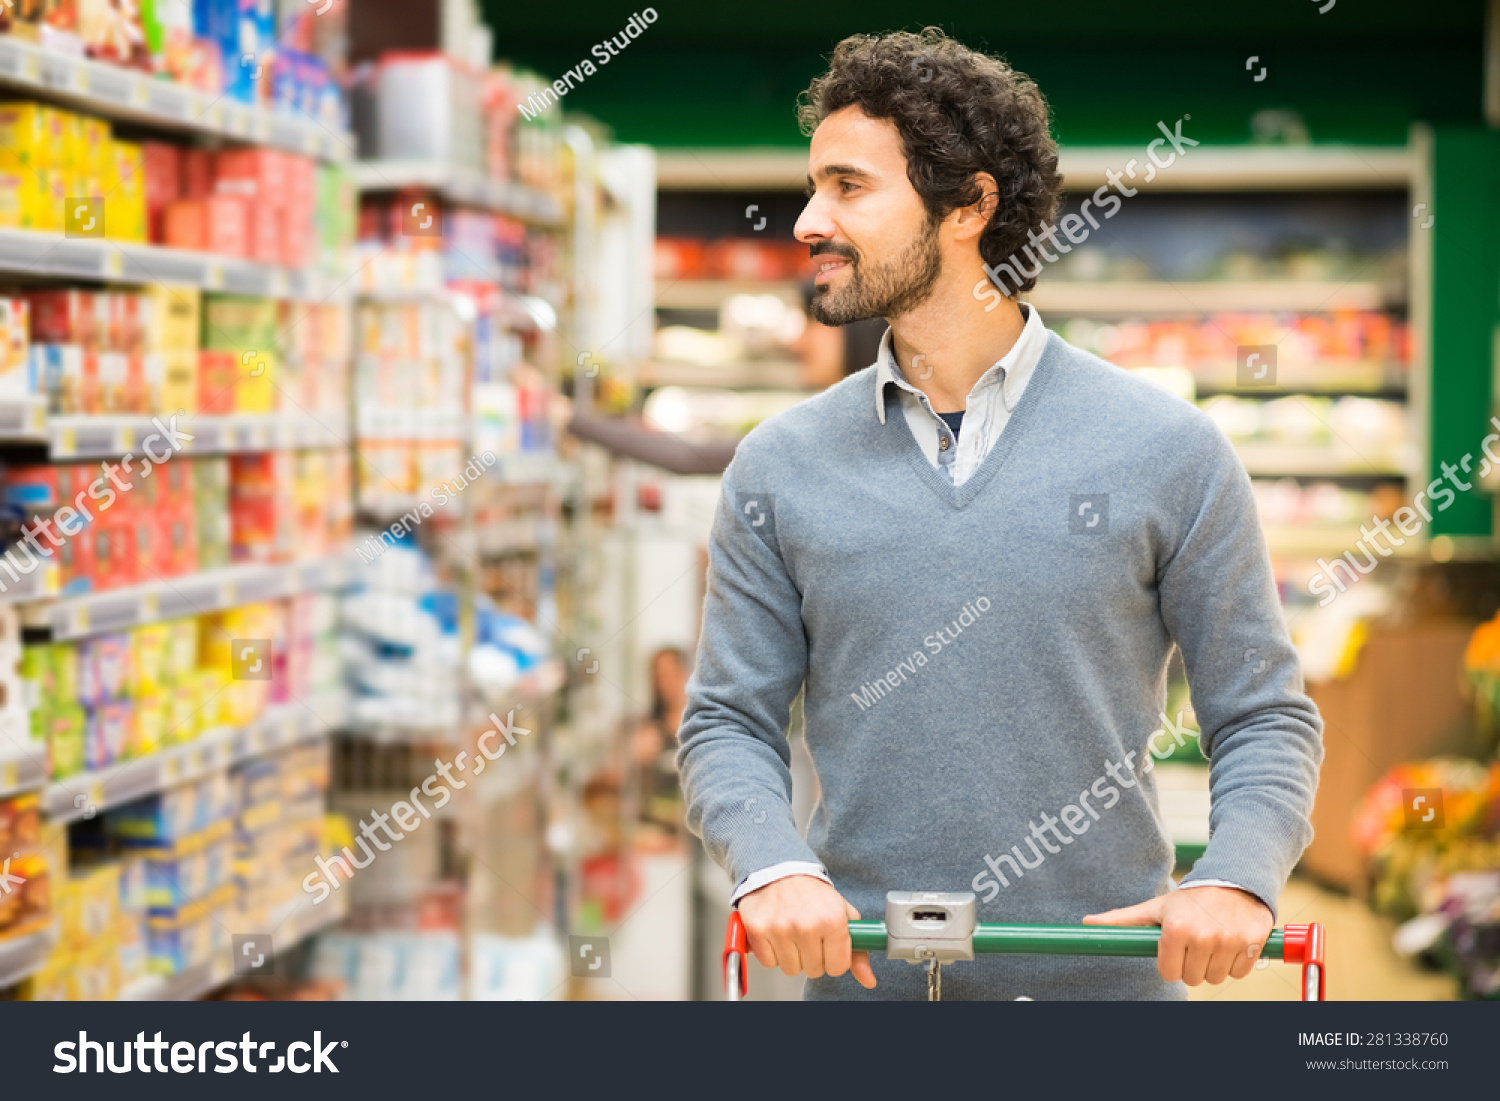 Handsome Man Shopping In A Supermarket Stock Photo 281338760 : Shutterstock